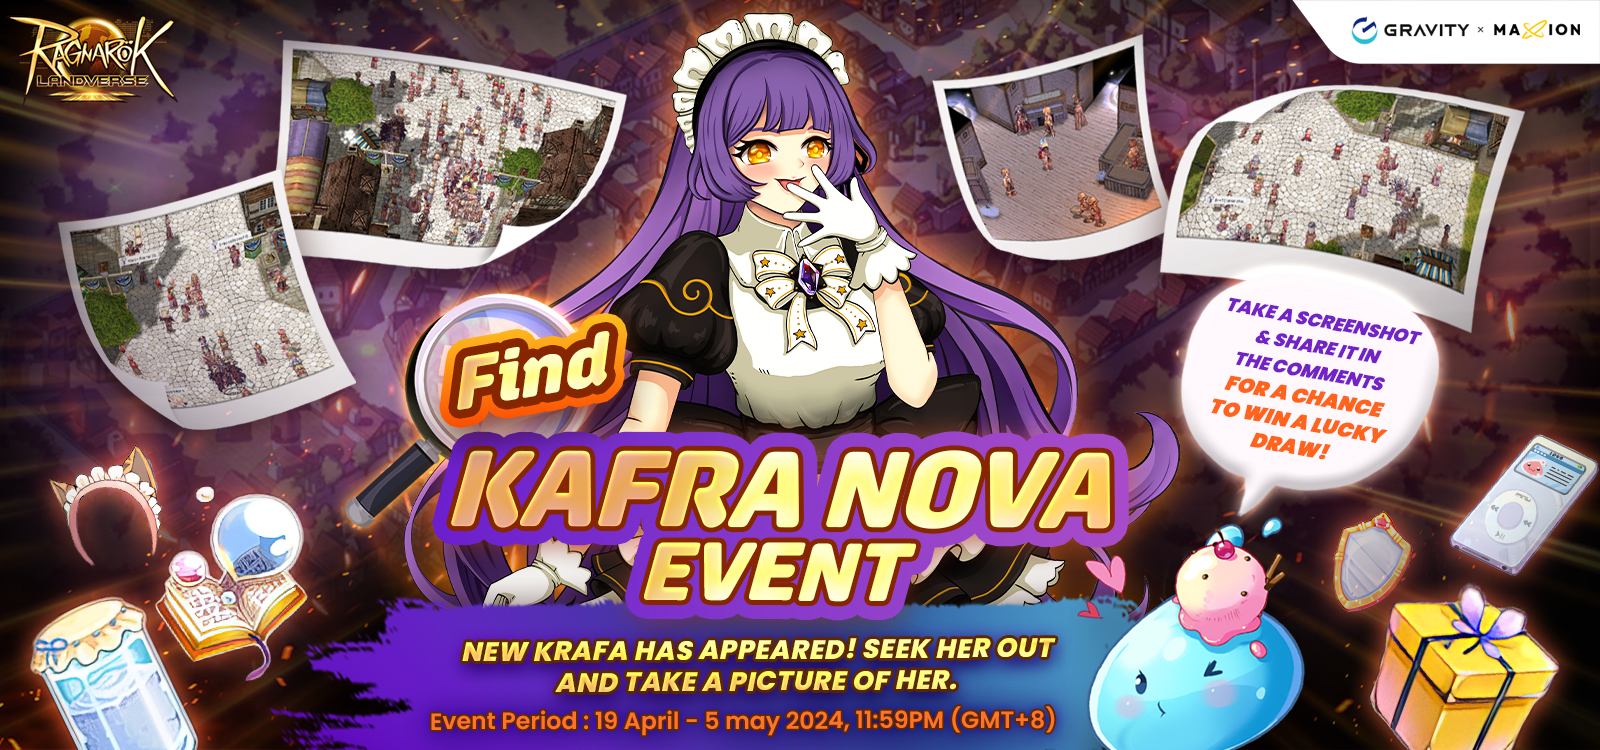 🔍 Finding Kafra NOVA Event & Share Screenshot for a Chance to Win Lucky Draw Prizes (Facebook)